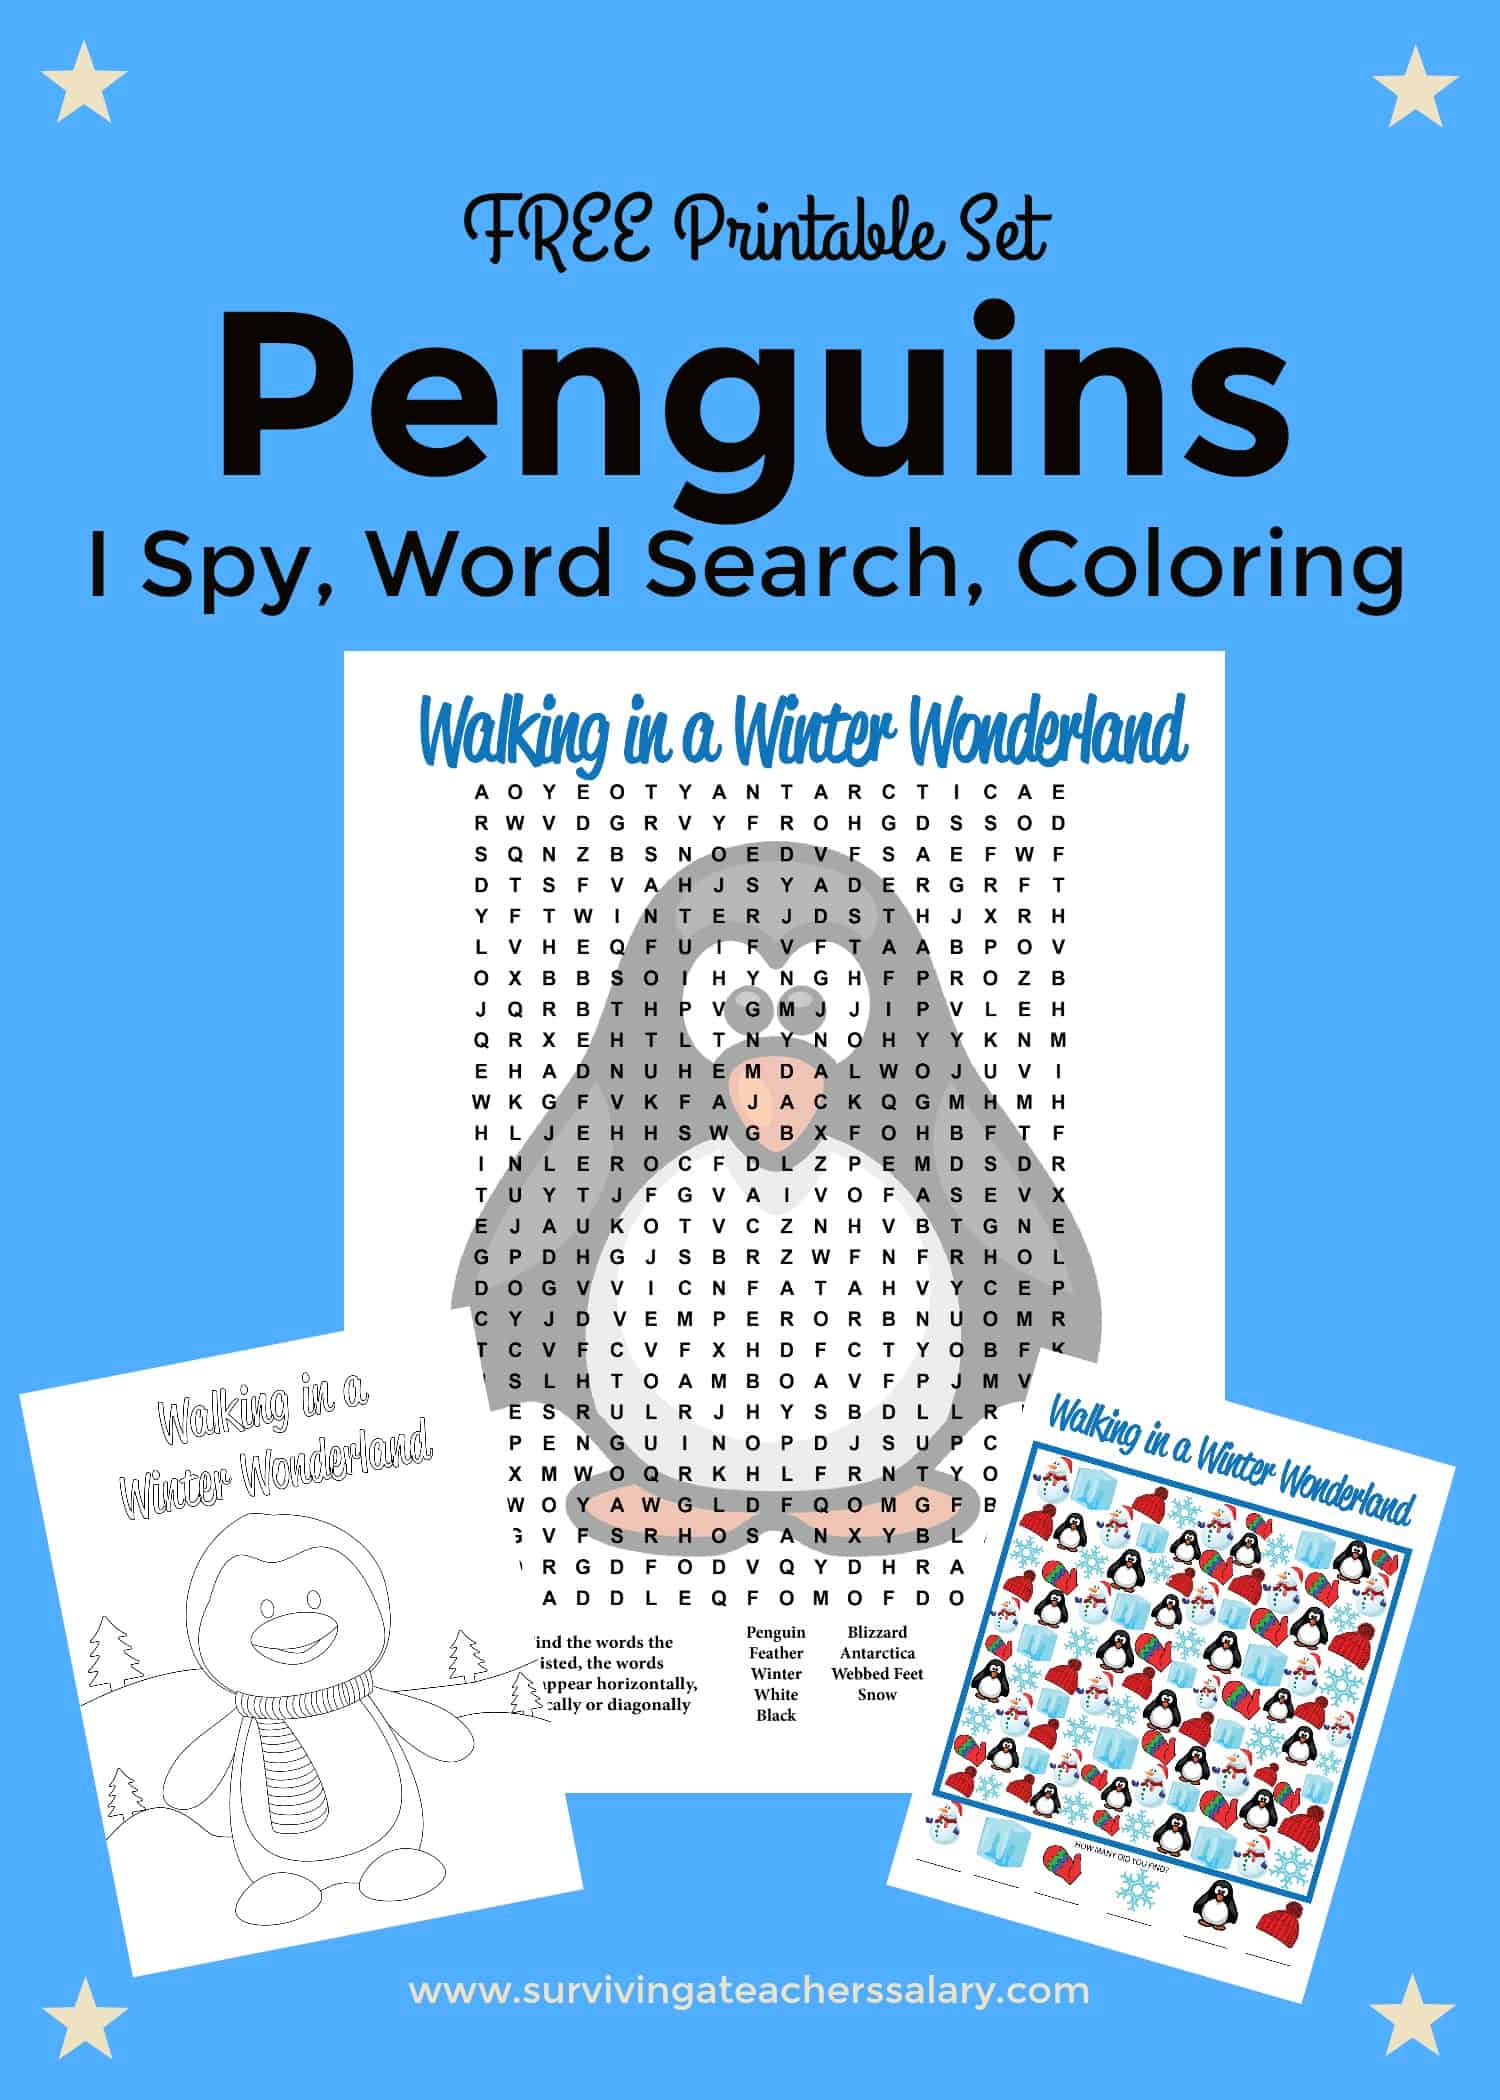 Free printable penguins worksheets coloring sheet word search i spy